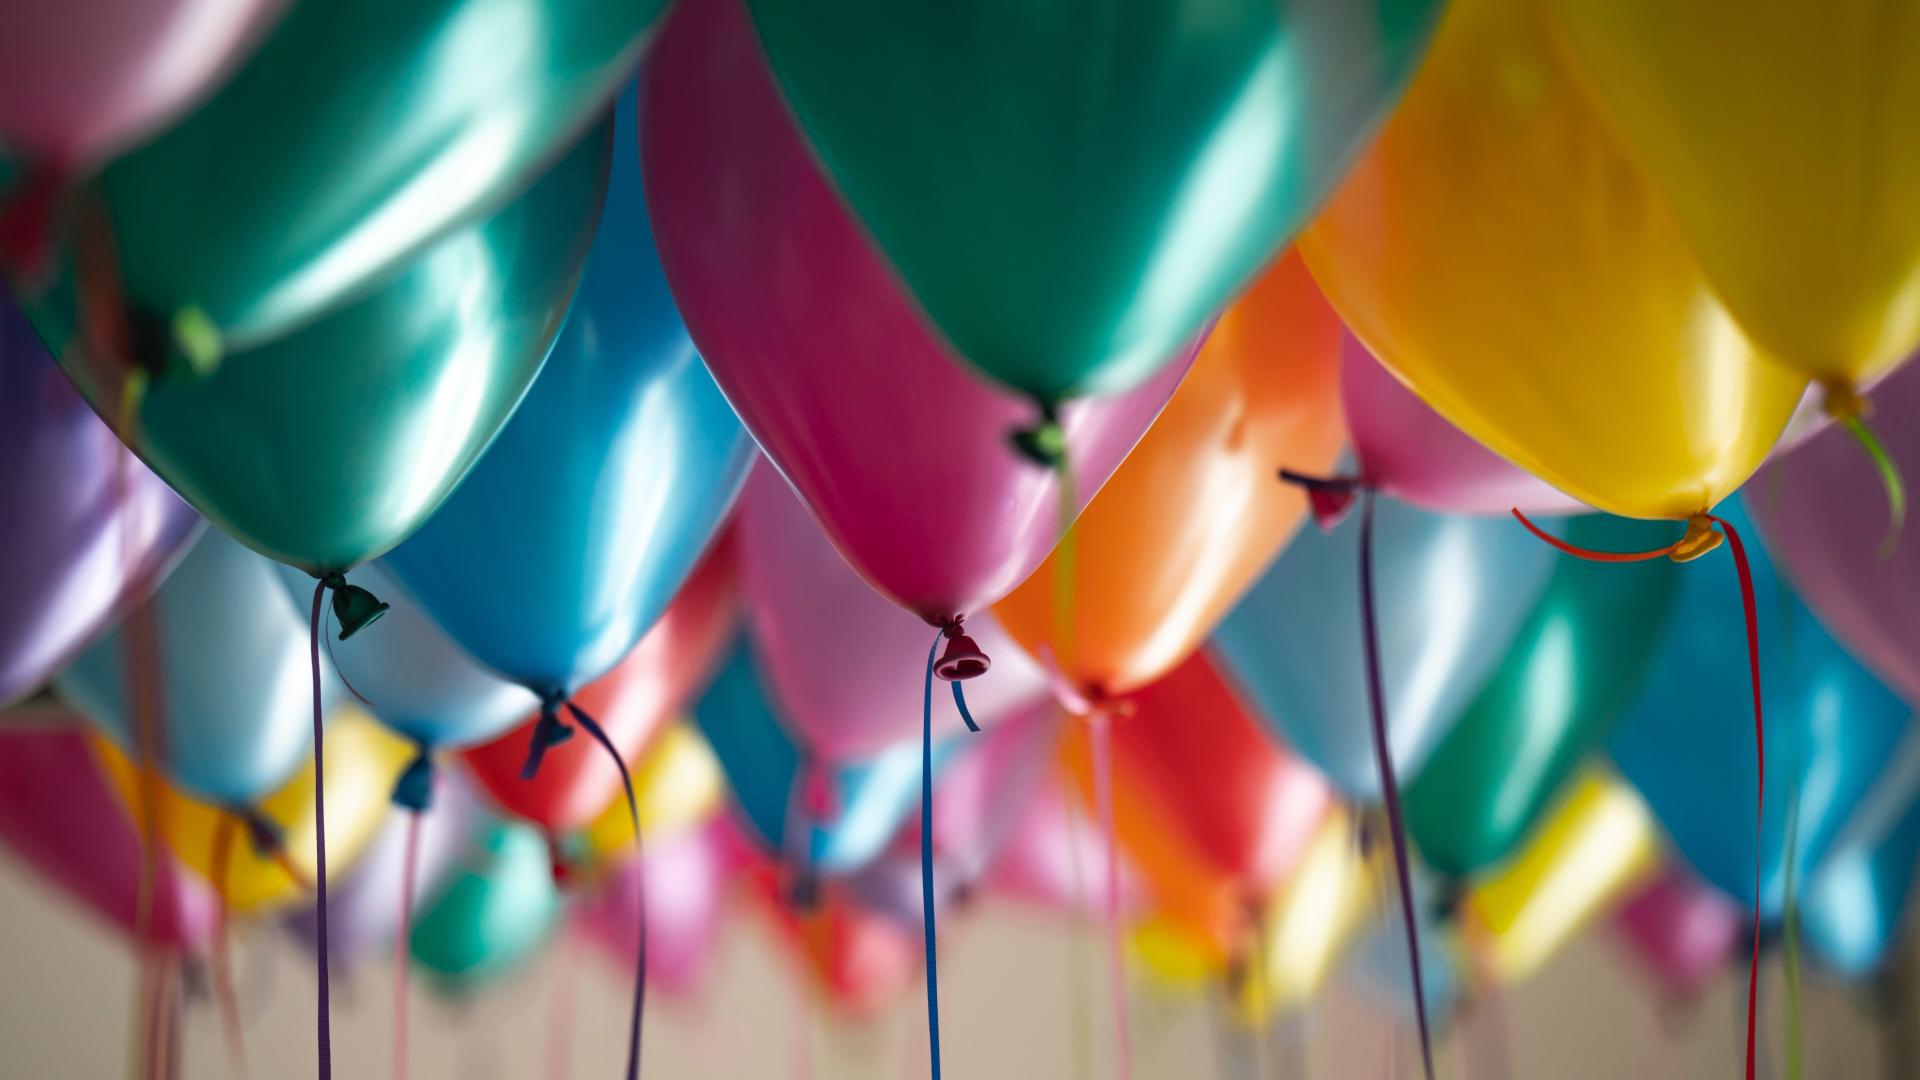 Find your Birthday Party Venue in North London